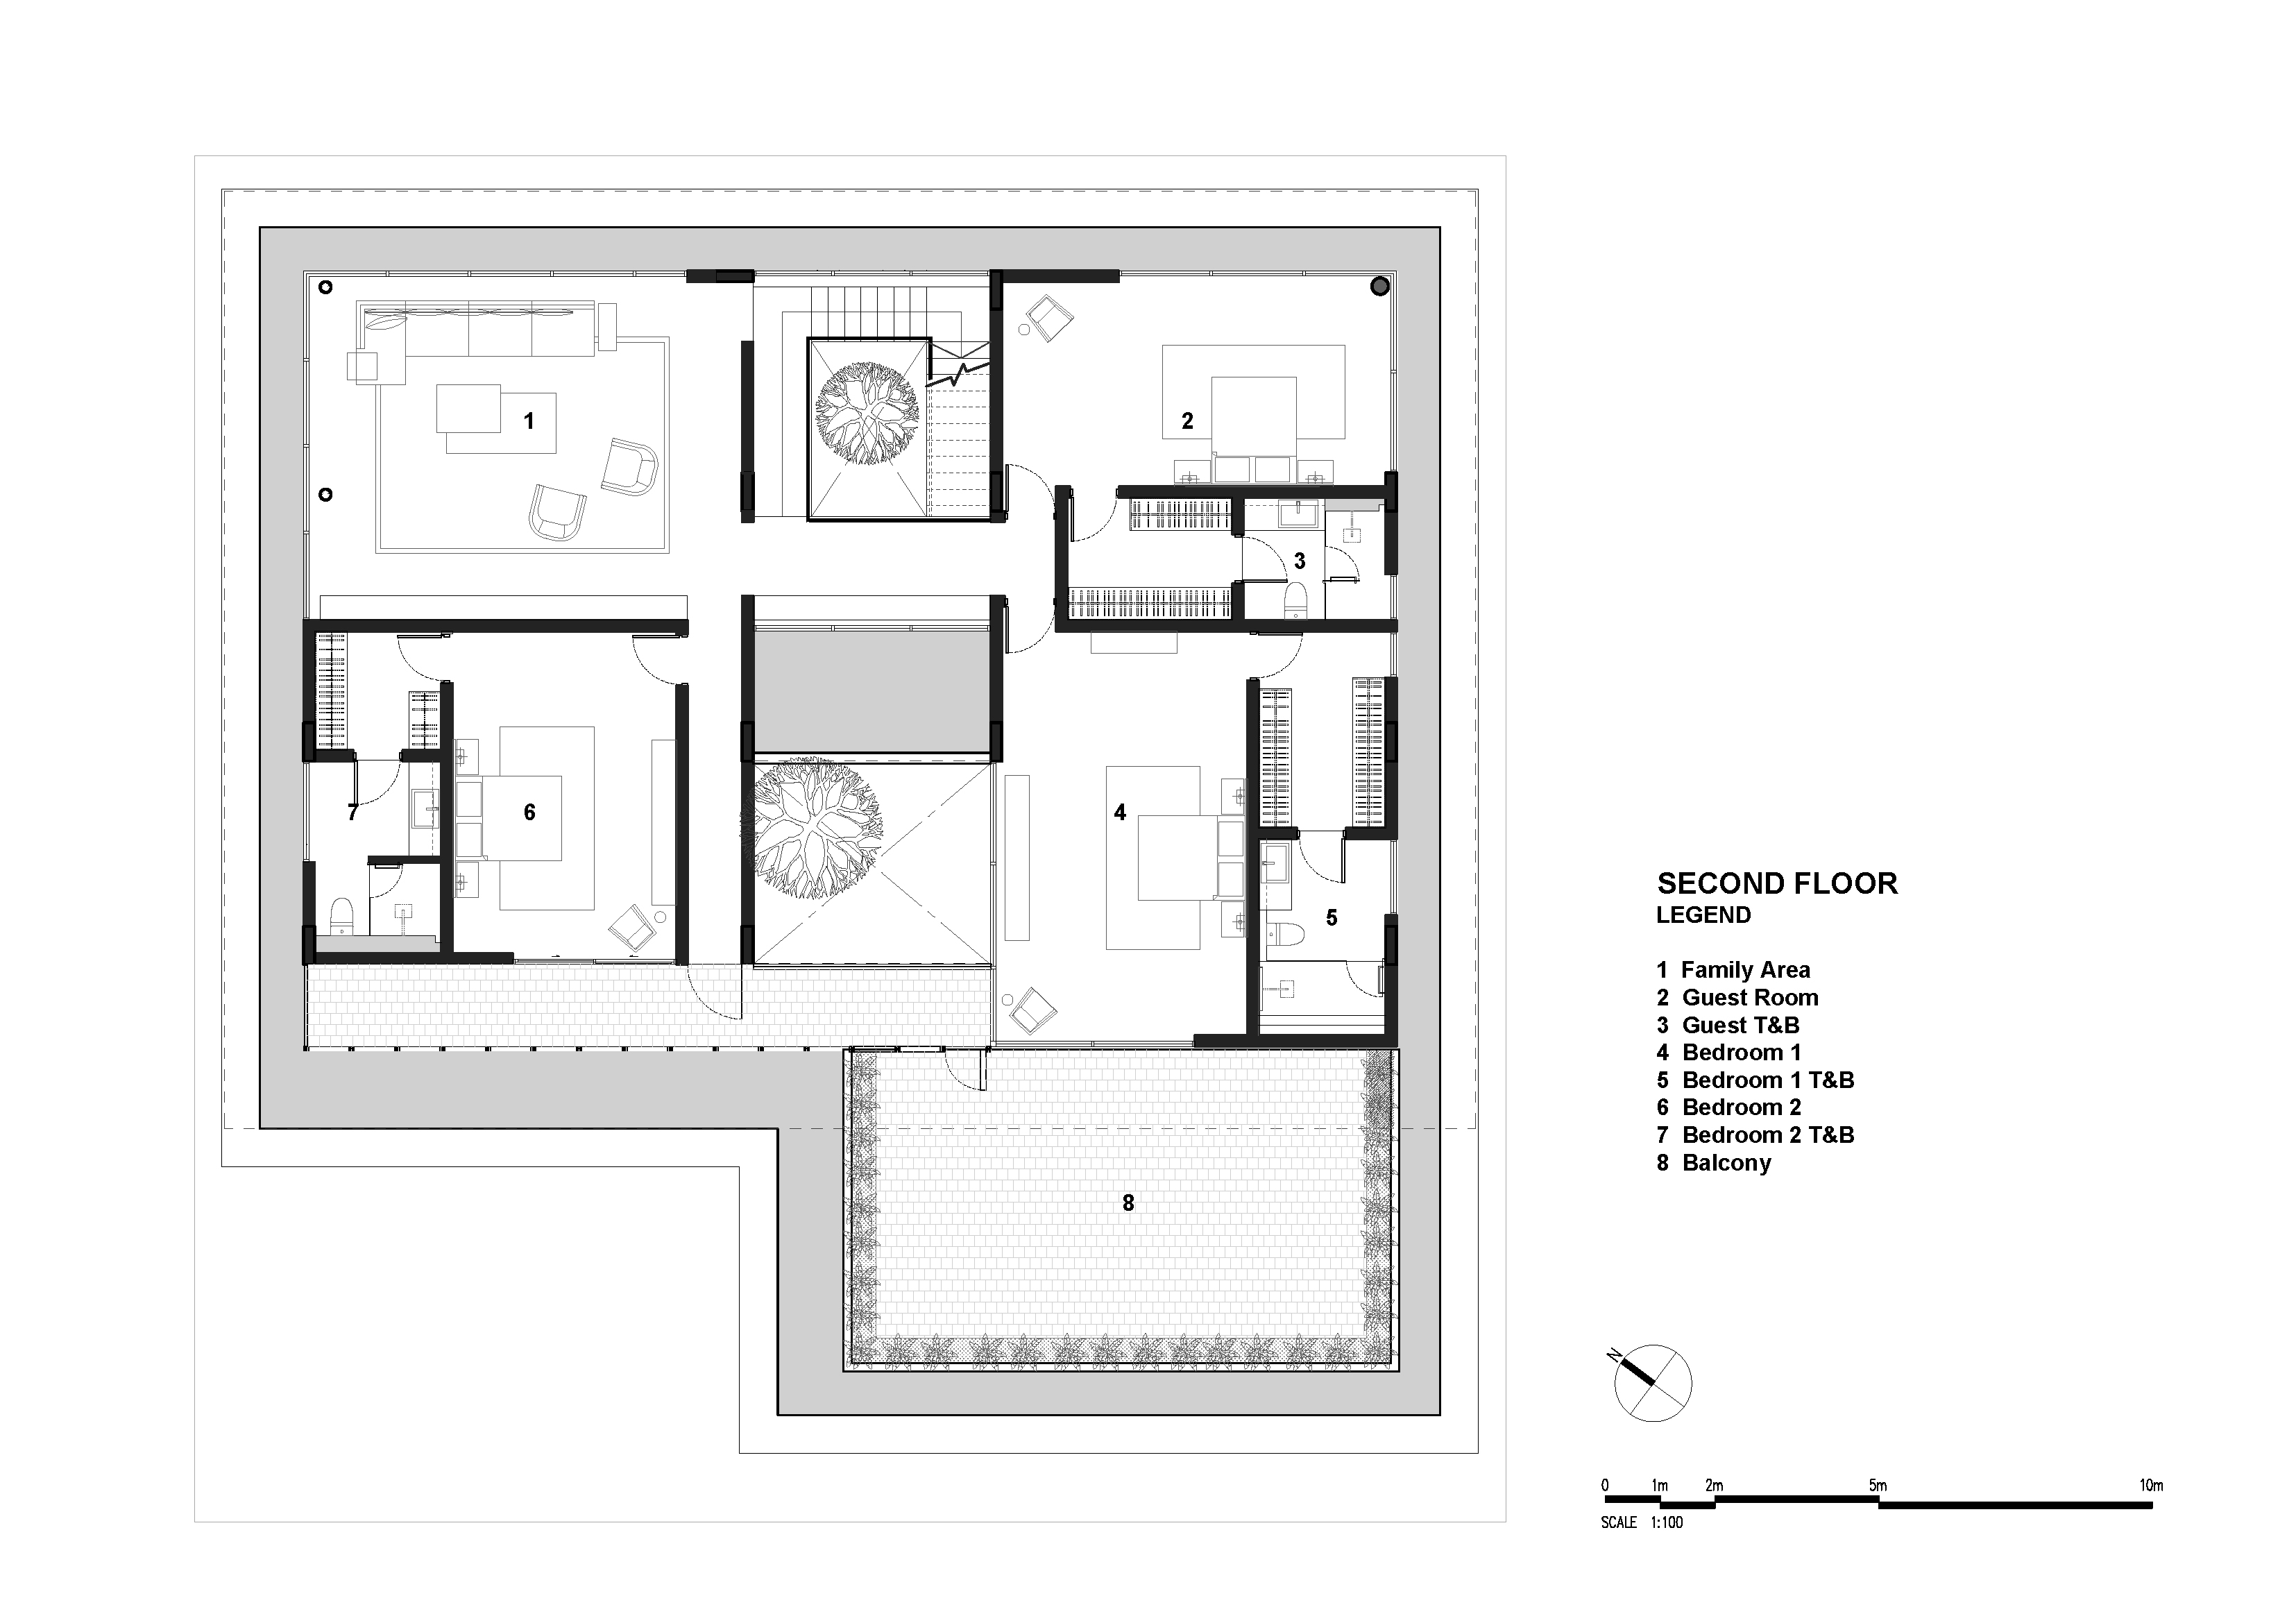 Second Floor Plan Screen House, Source by PXP Design Workshop